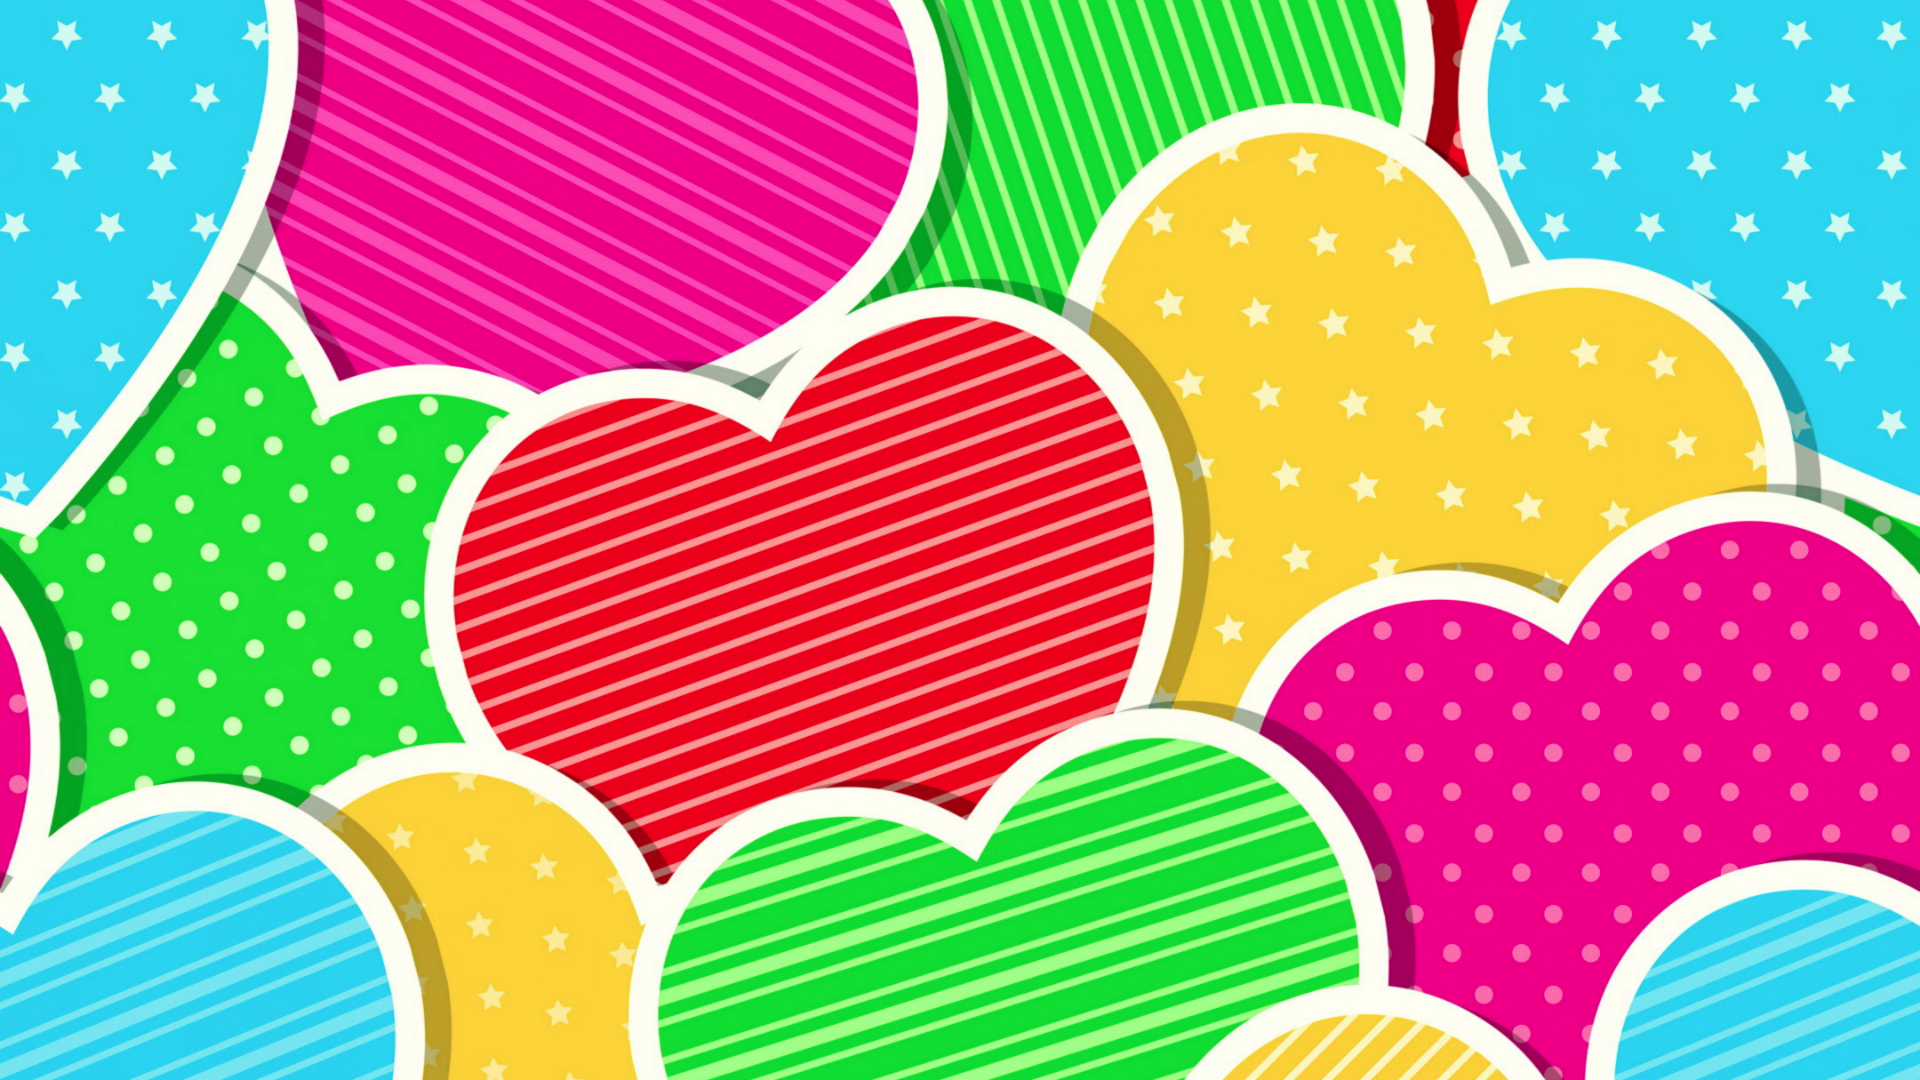 Wallpapers Hunter - Colorful Wallpapers Heart , HD Wallpaper & Backgrounds